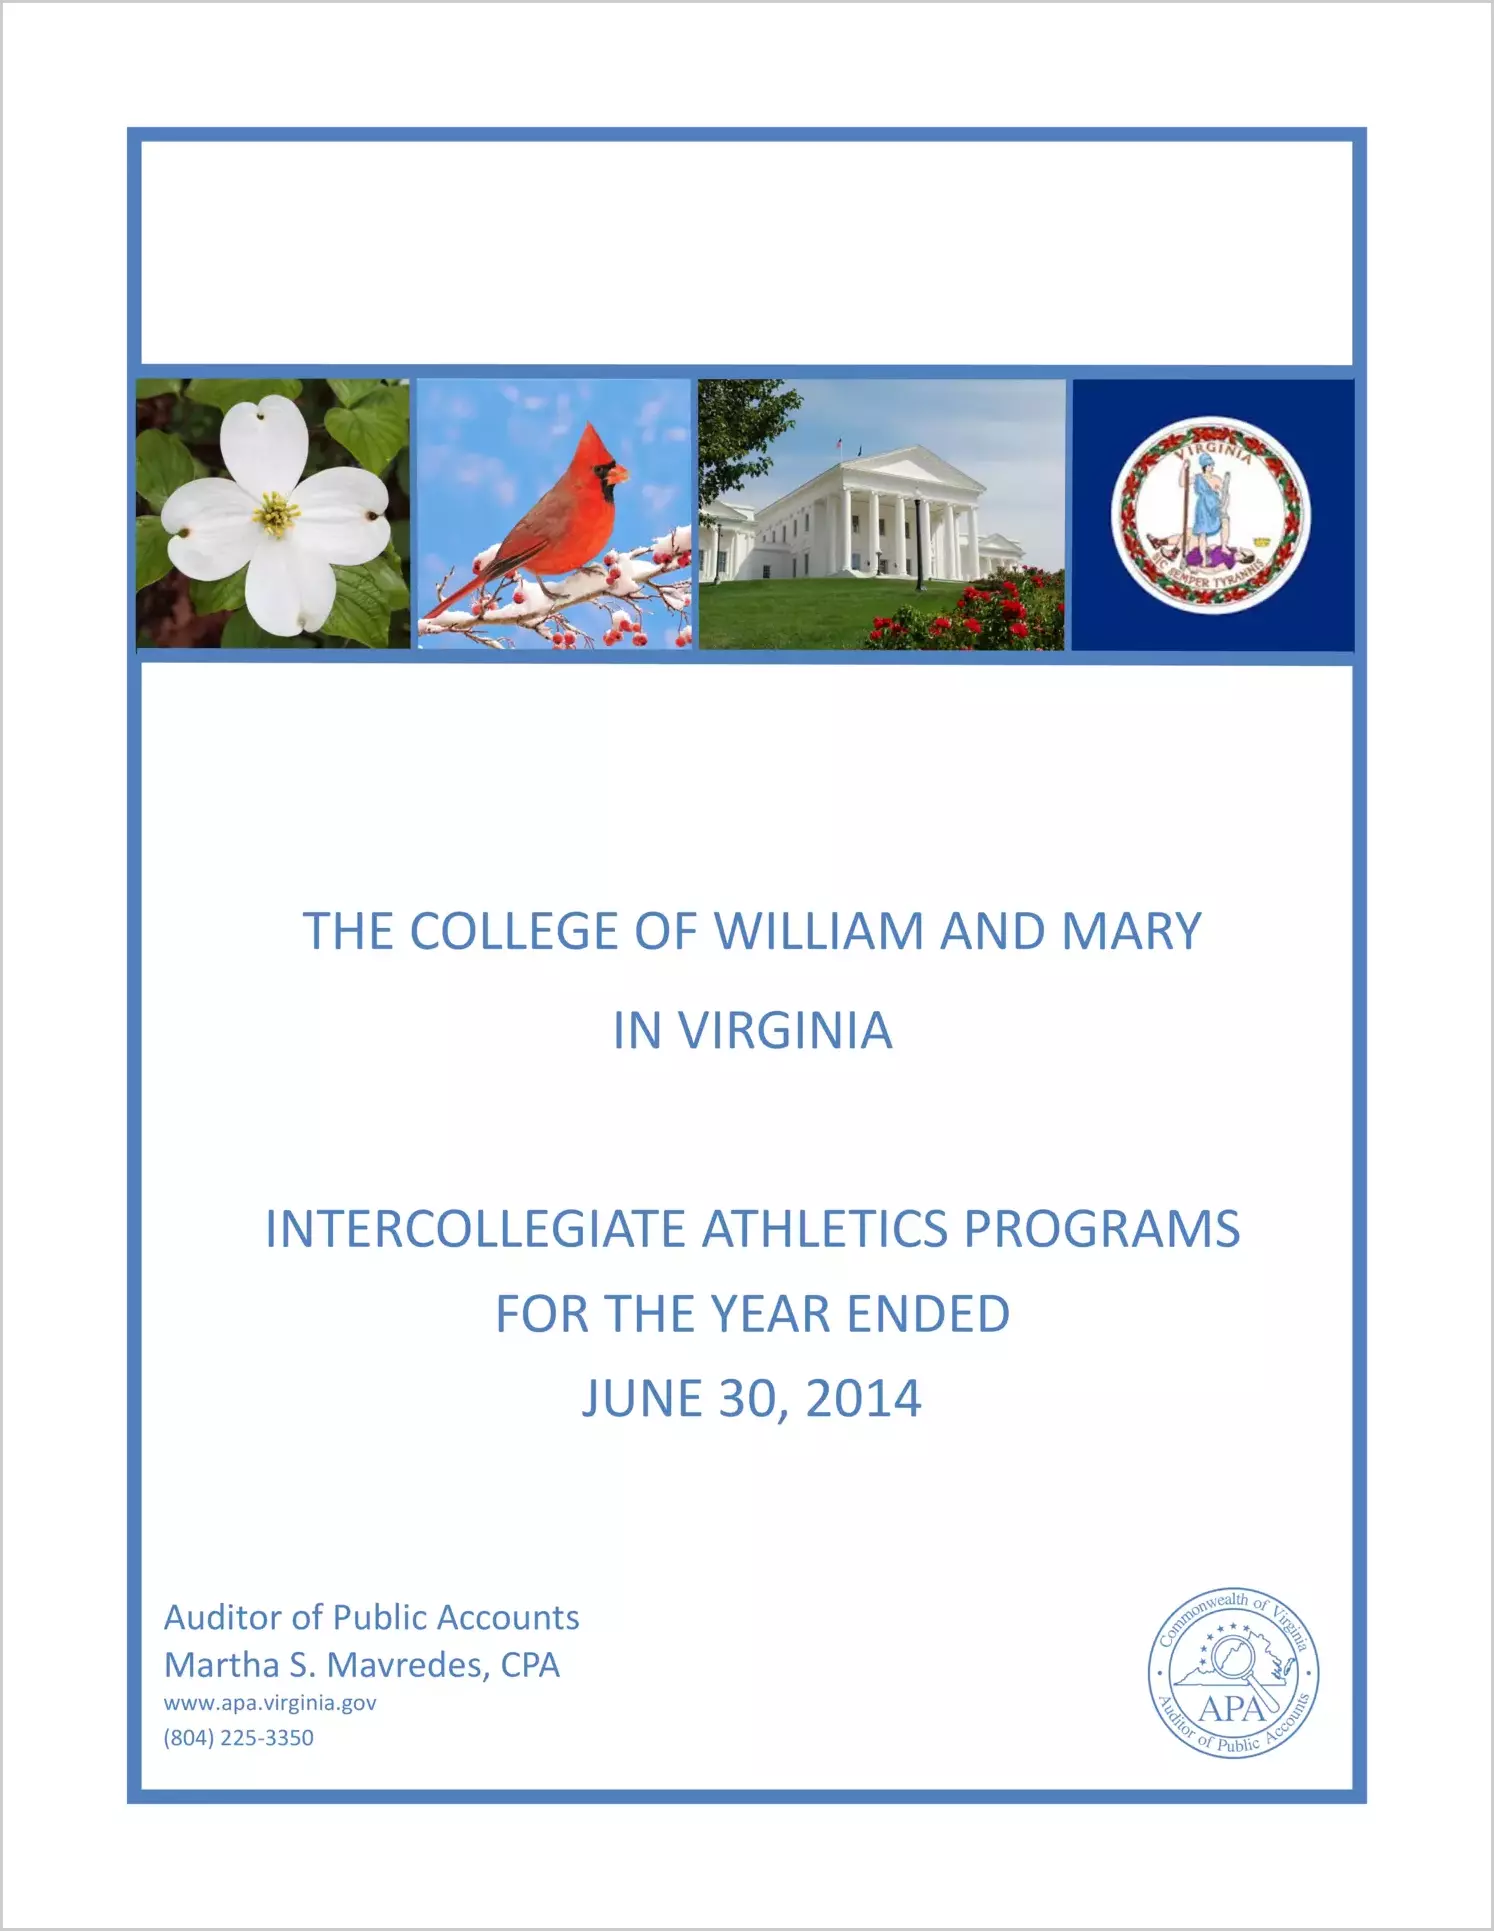 The College of William and Mary in Virginia Intercollegiate Athletics Programs for the year ended June 30, 2014